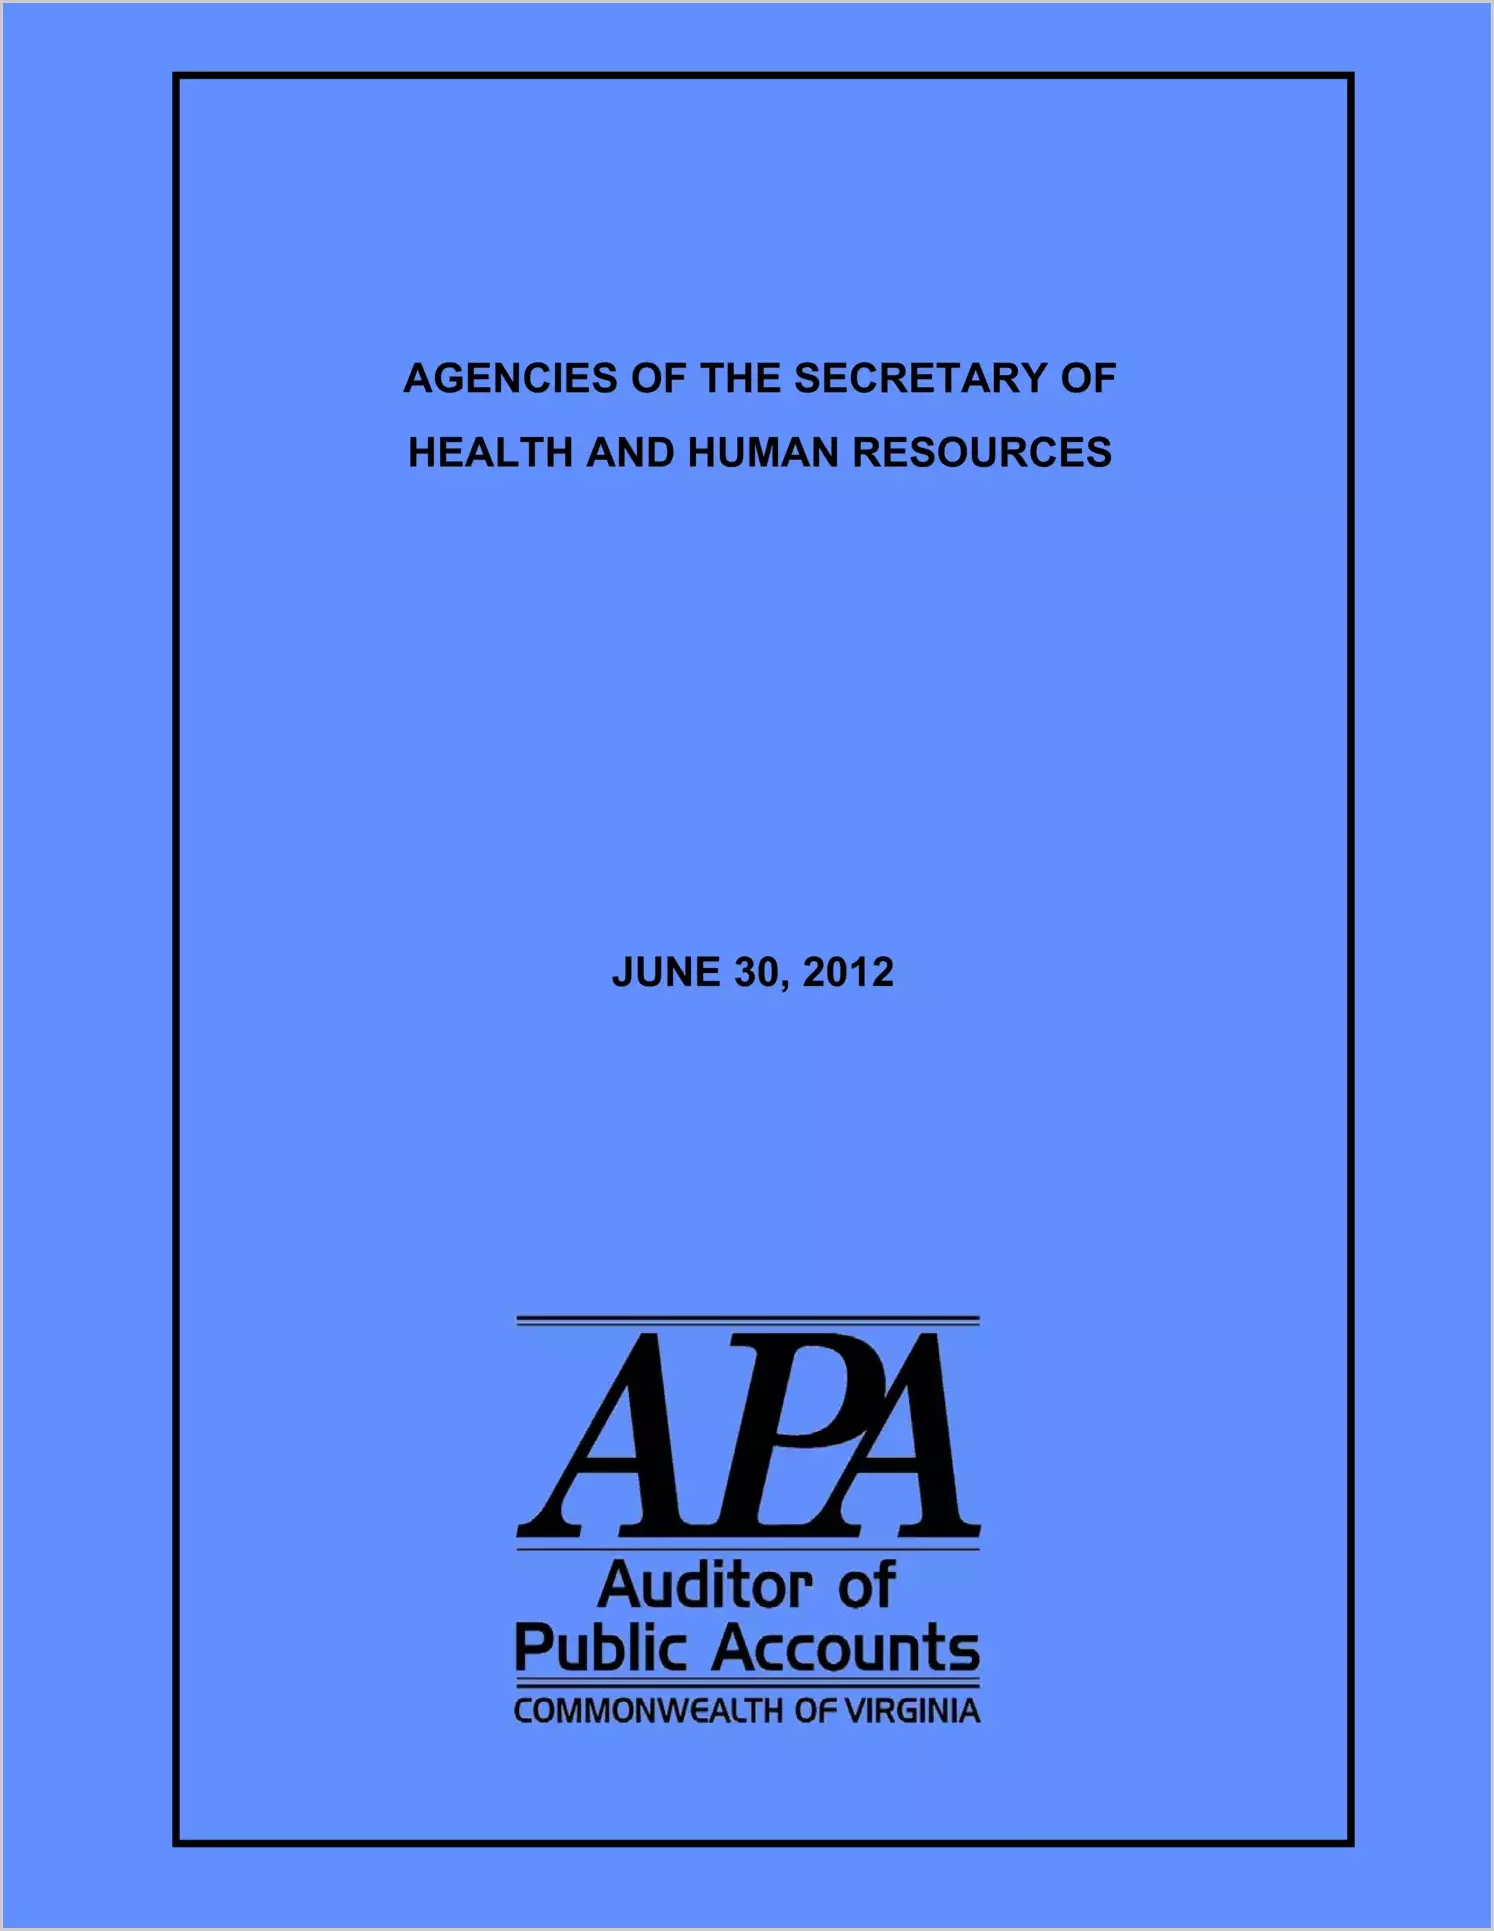 Agencies of the Secretary of Health and Human Resources - June 30, 2012